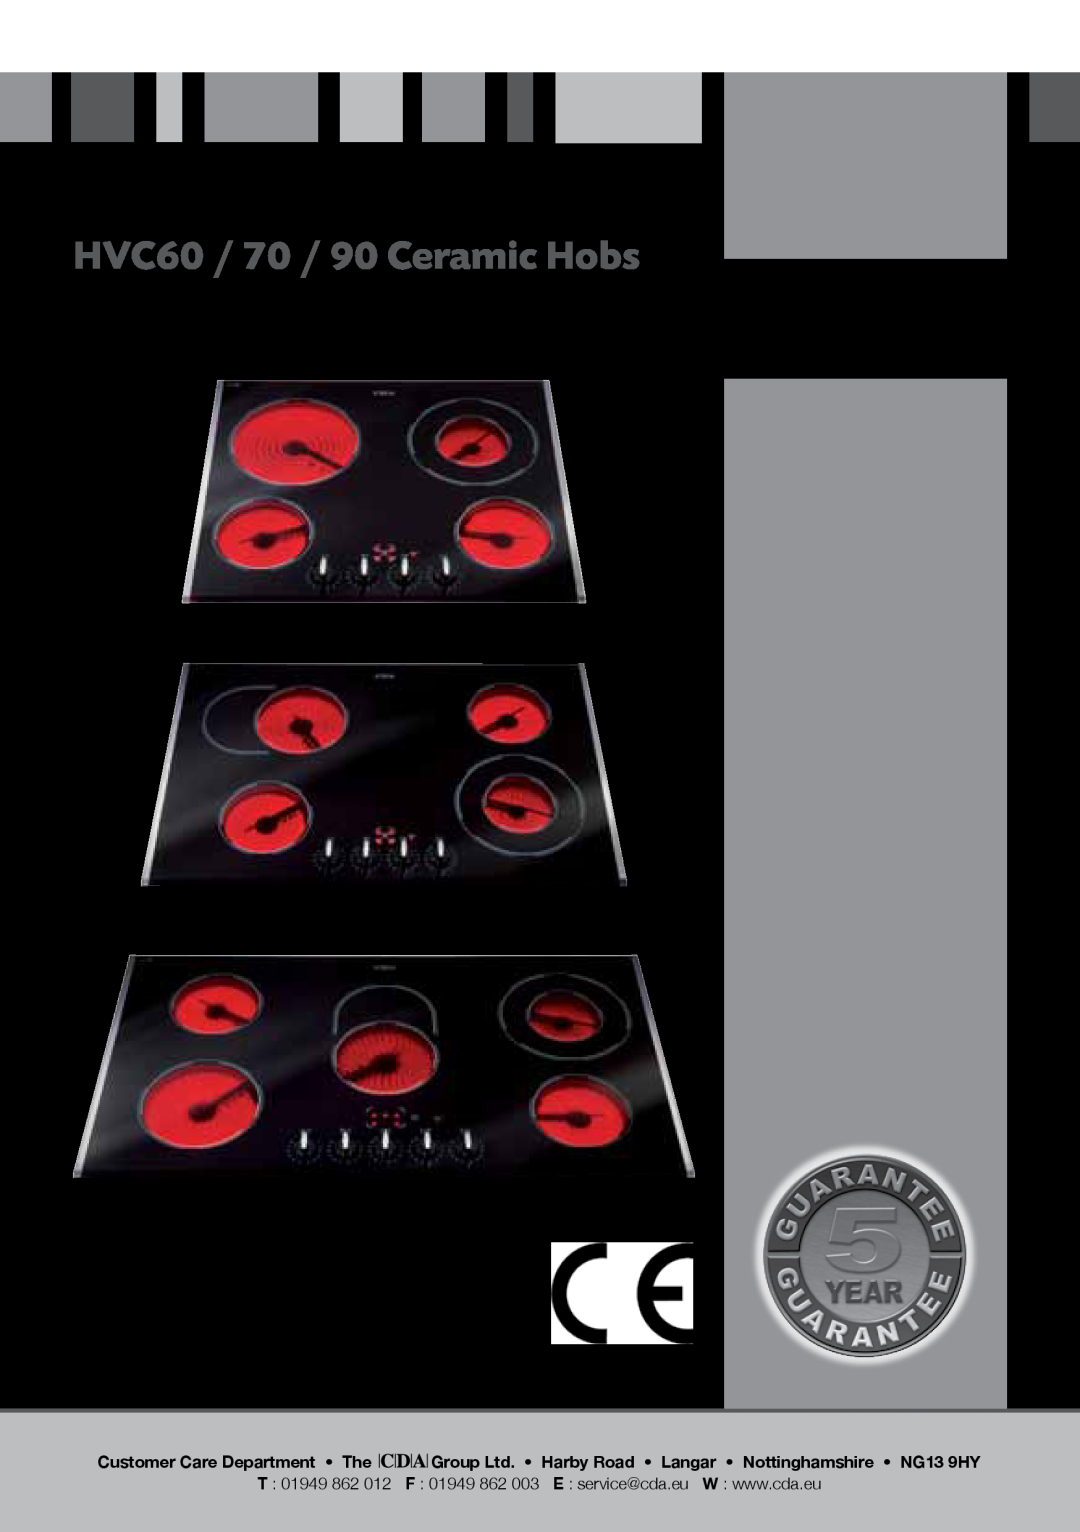 CDA manual HVC60 / 70 / 90 Ceramic Hobs, Manual for Installation, Use and Maintenance, Customer Care Department The 